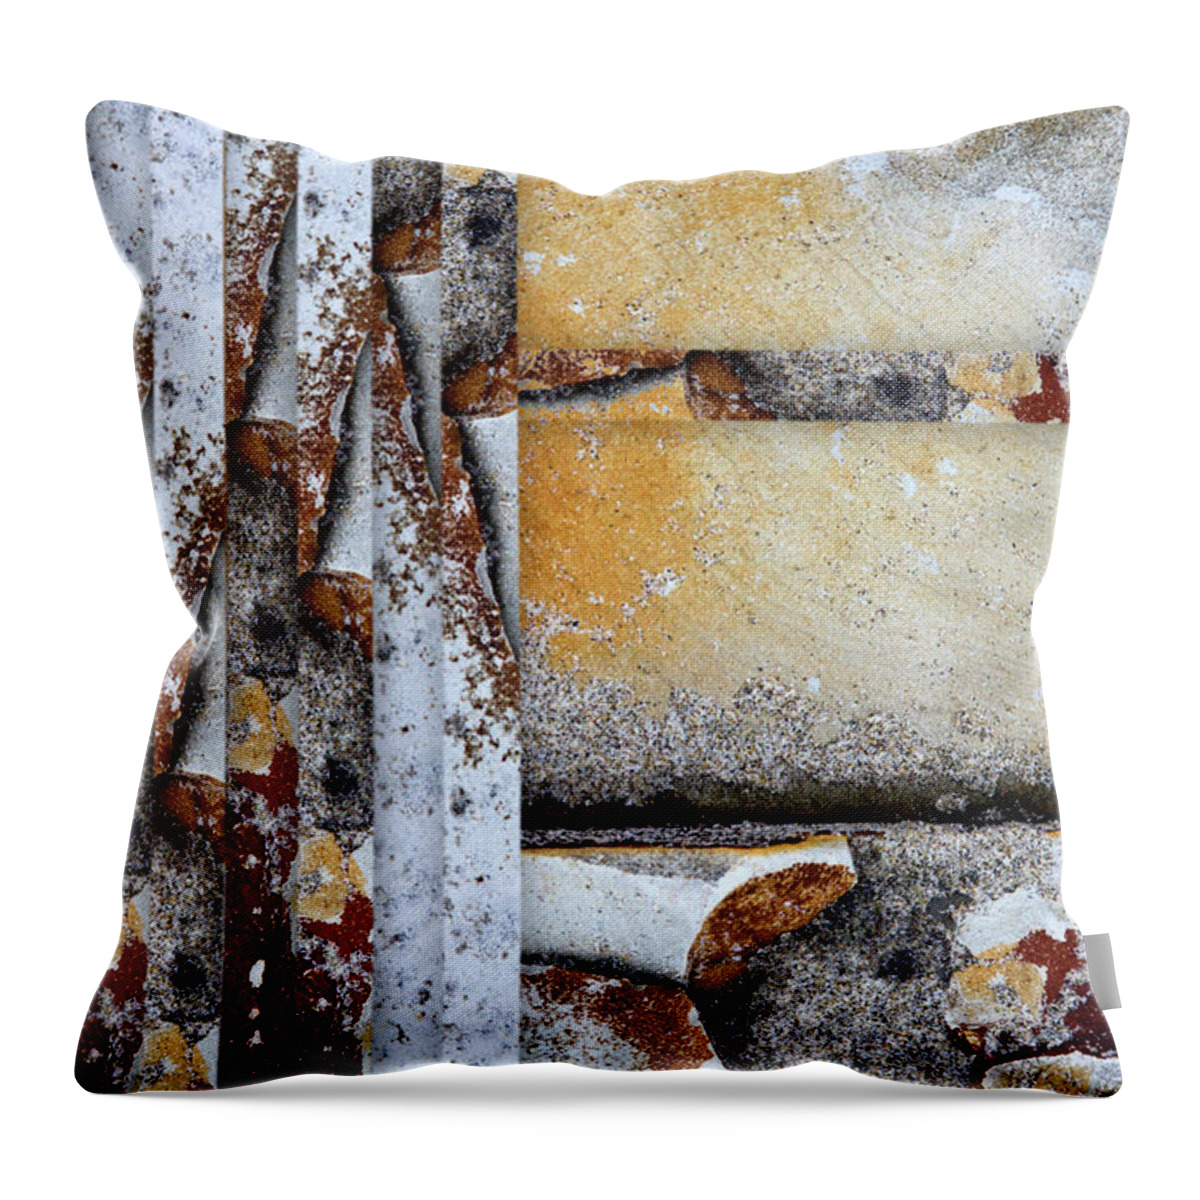 Bold Throw Pillow featuring the mixed media Rock Study 18 by Carol Leigh